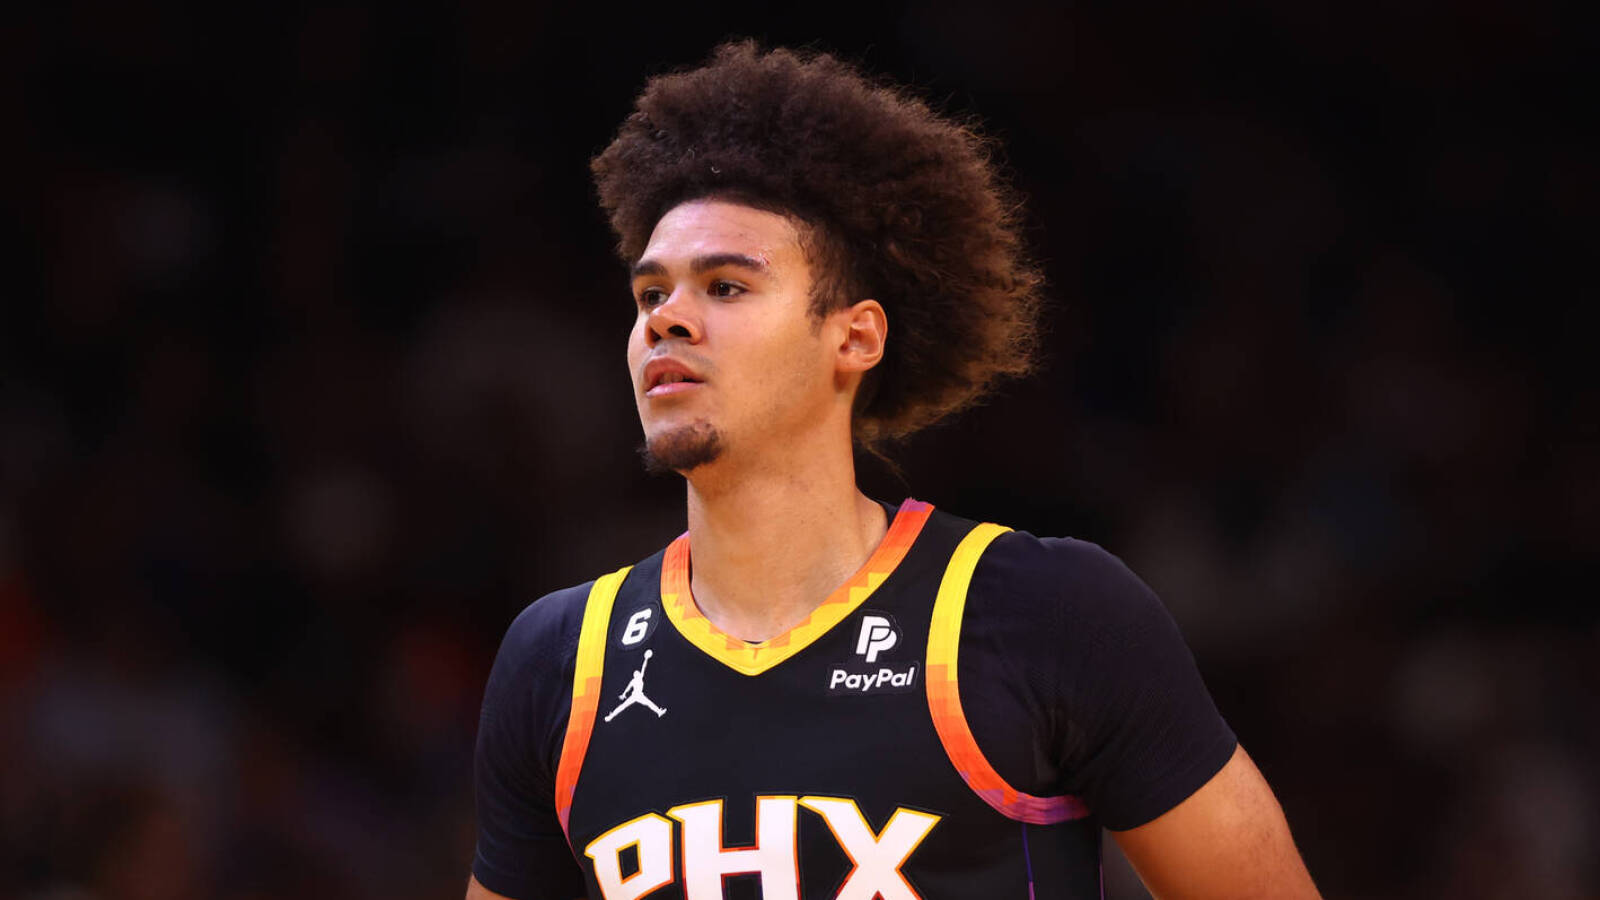 Timeline of return for Suns' Cameron Johnson unclear